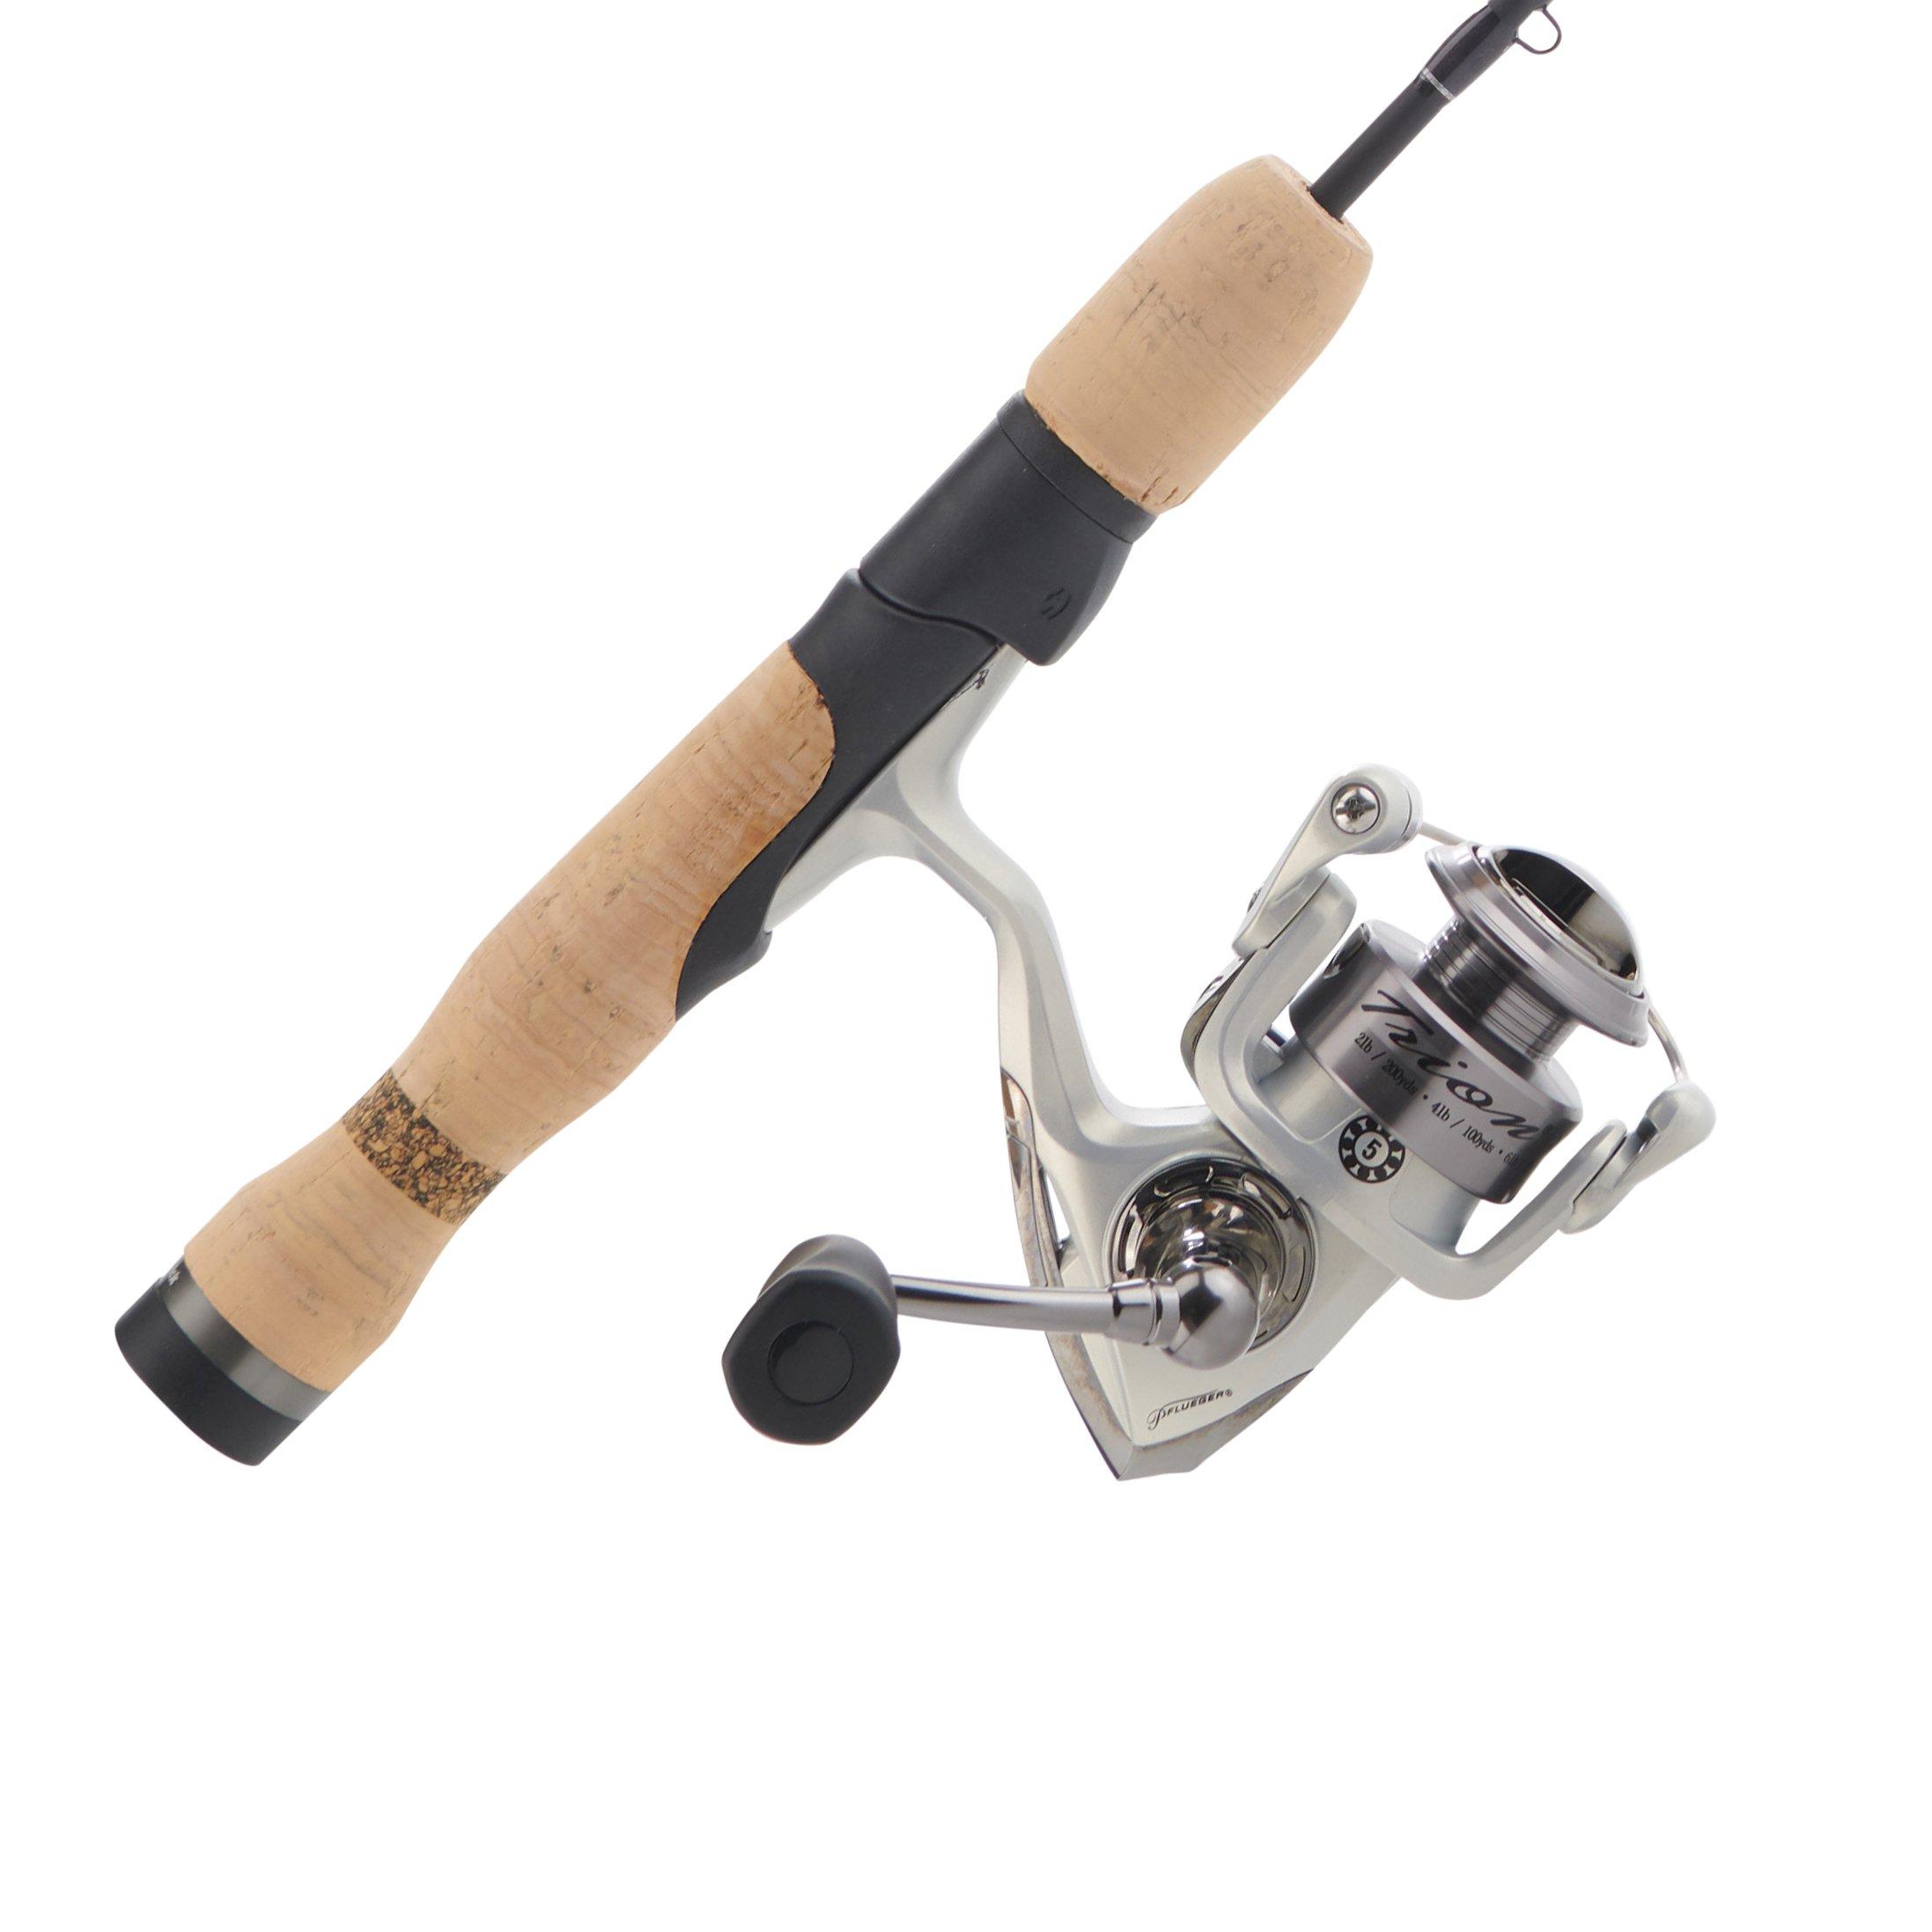 Pflueger Trion Spin Combo, pflueger, trion, spin, combo, rod - The Snare  Shop